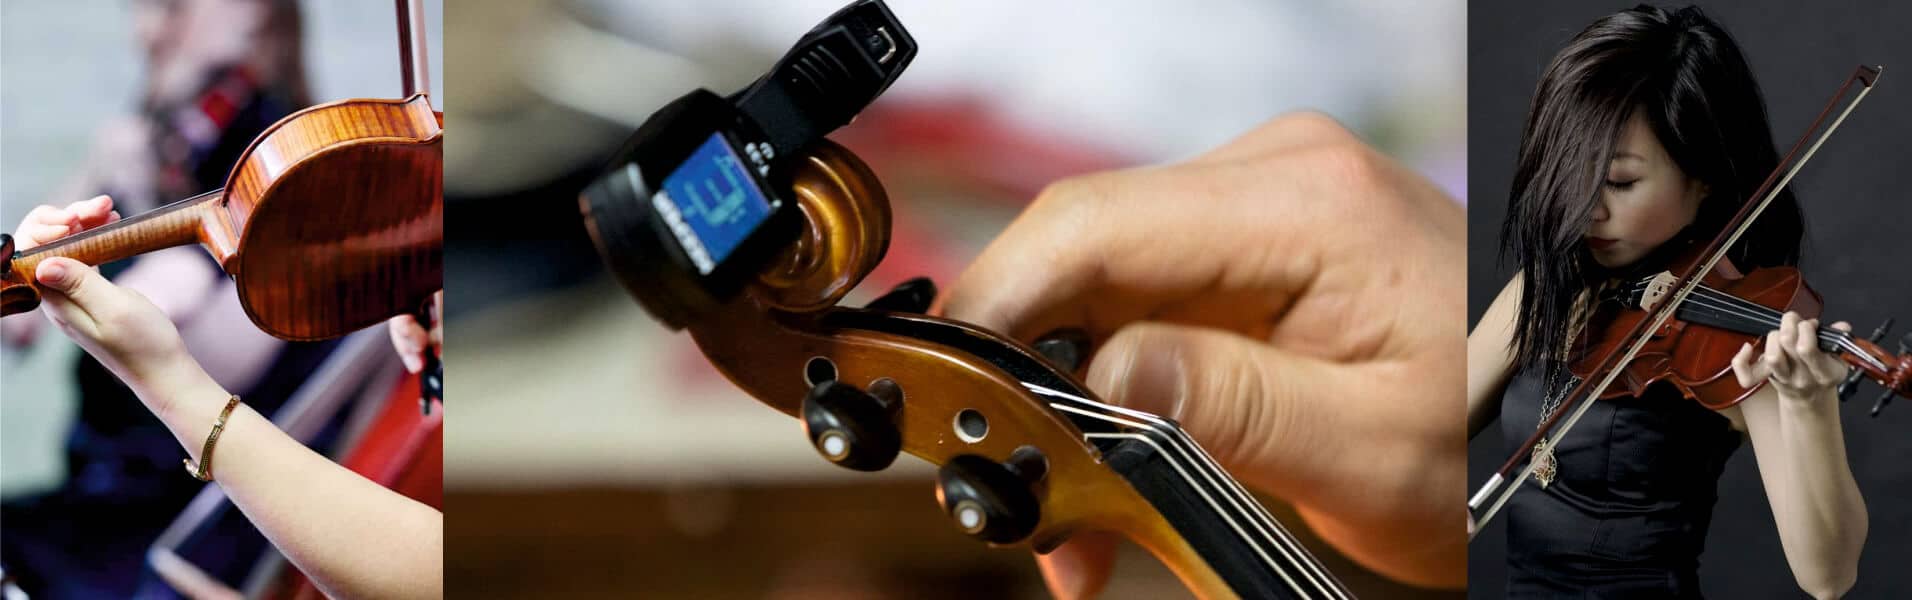 How to Tune a Violin: In-Detail Guide for Beginners [Upd. 2022]